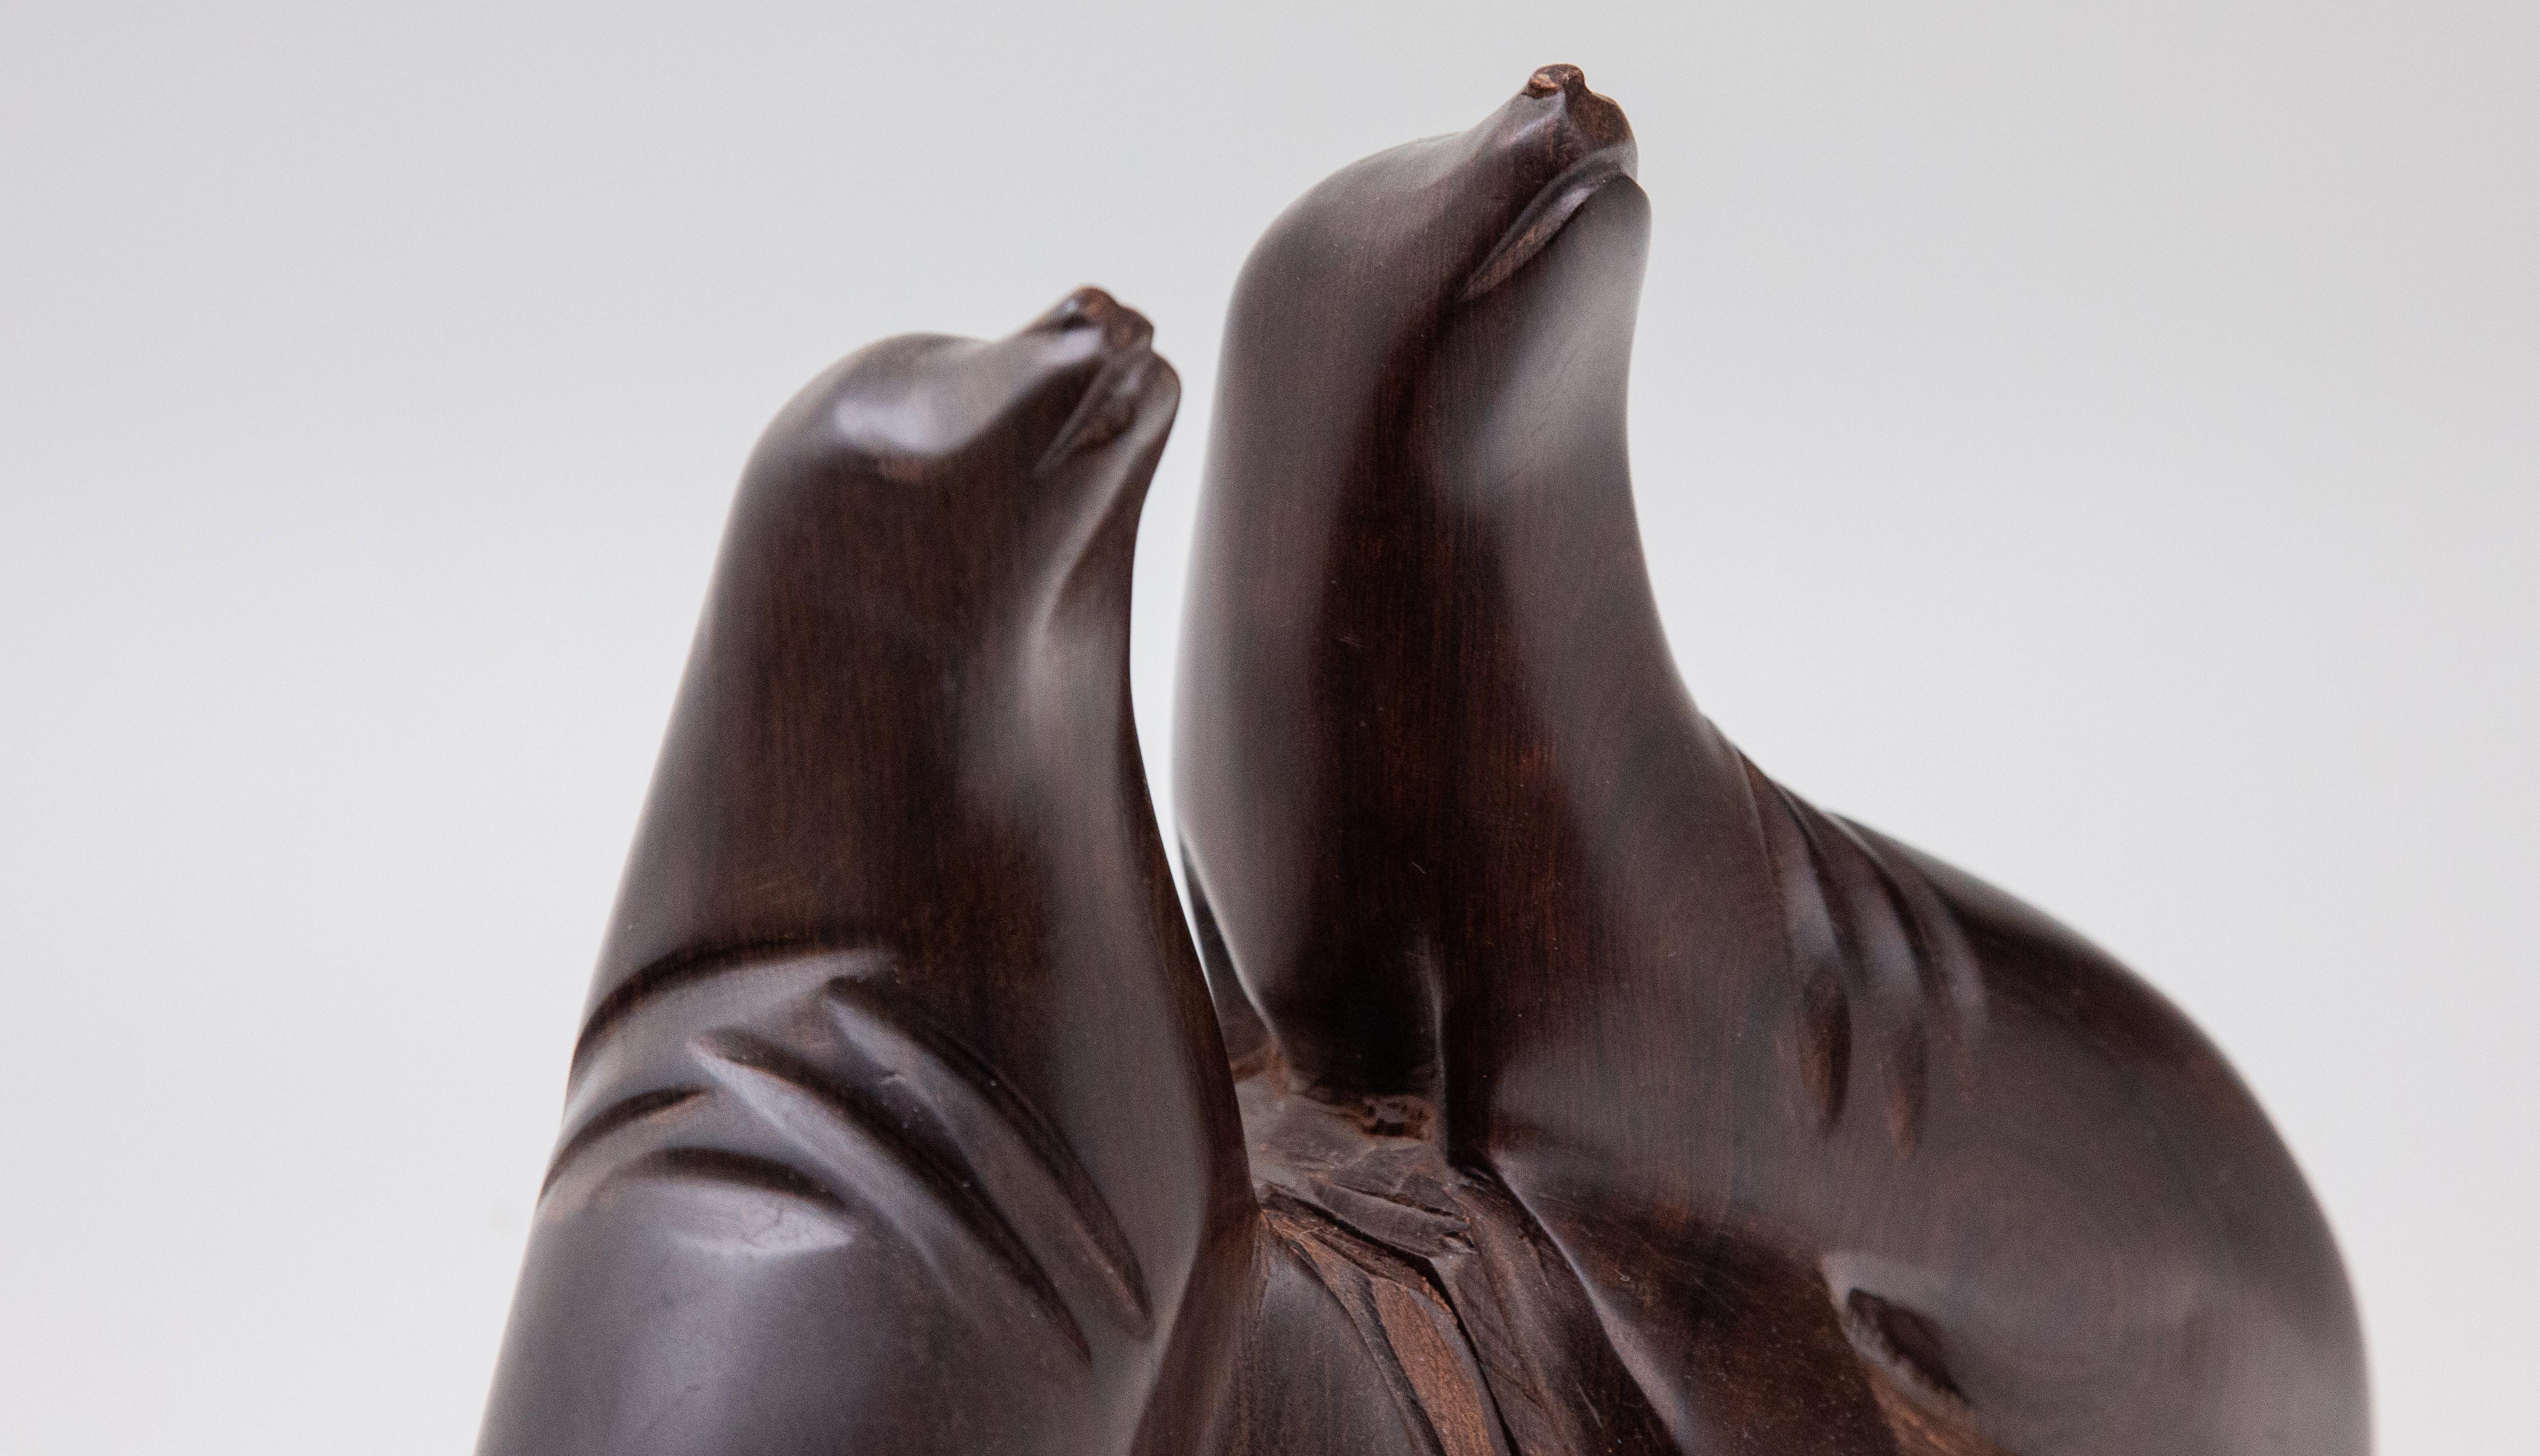 Hand-carved pair of ironwood sea lion bookends. Two mirror-image carved bookends depicting sea lion on rocks. Size: 10